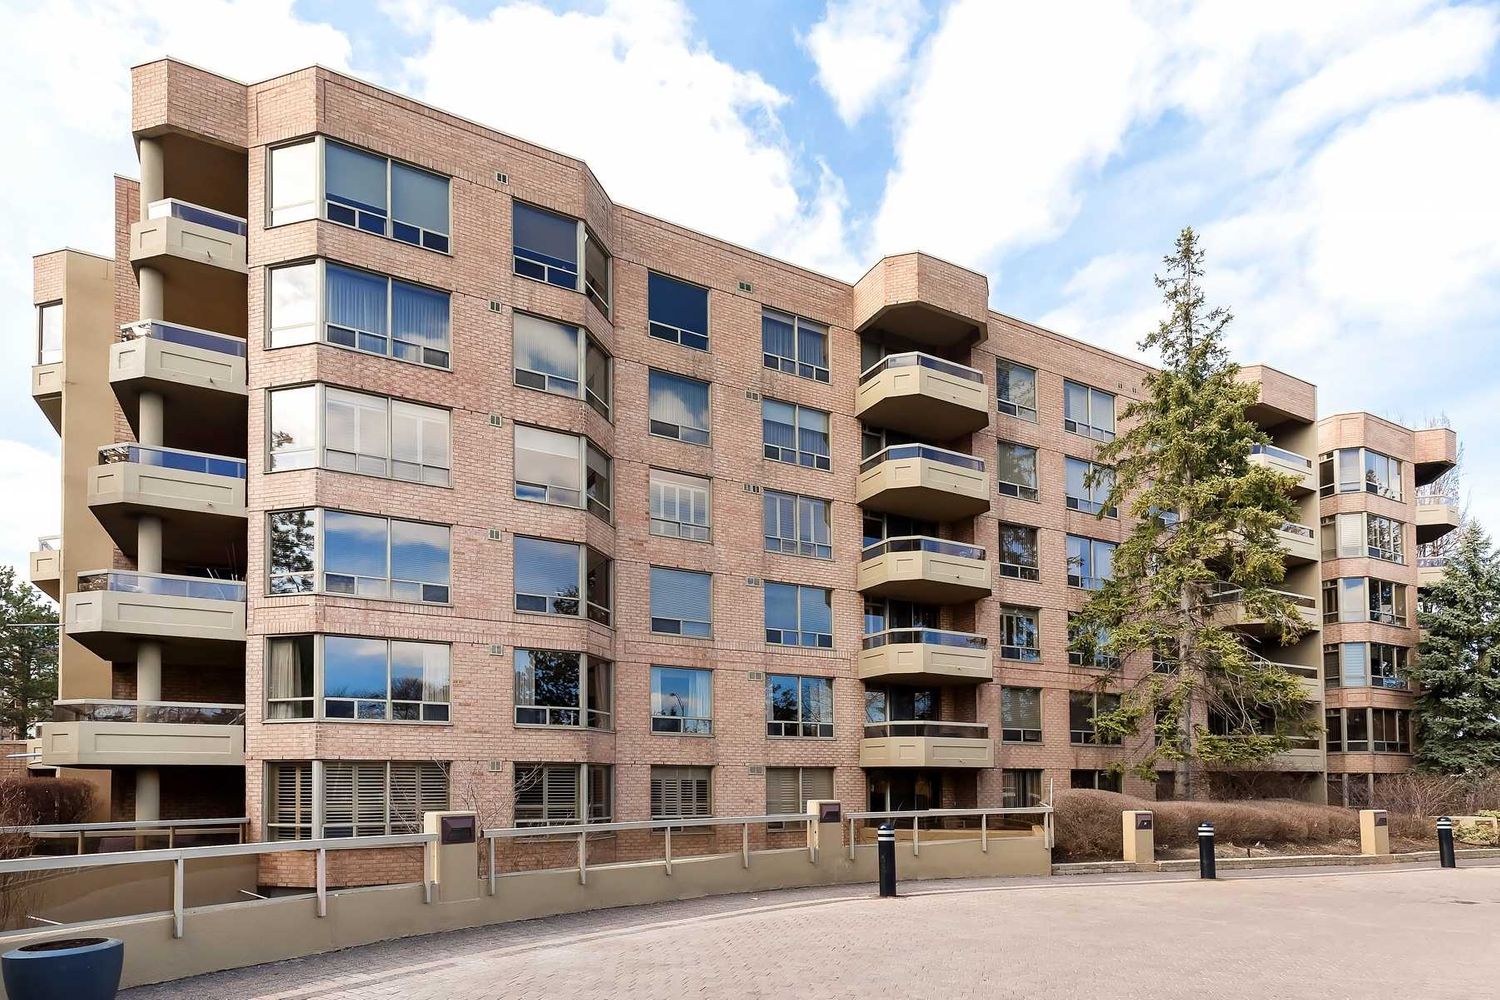 1210 Don Mills Road. Windfield Terrace Condos is located in  North York, Toronto - image #1 of 2